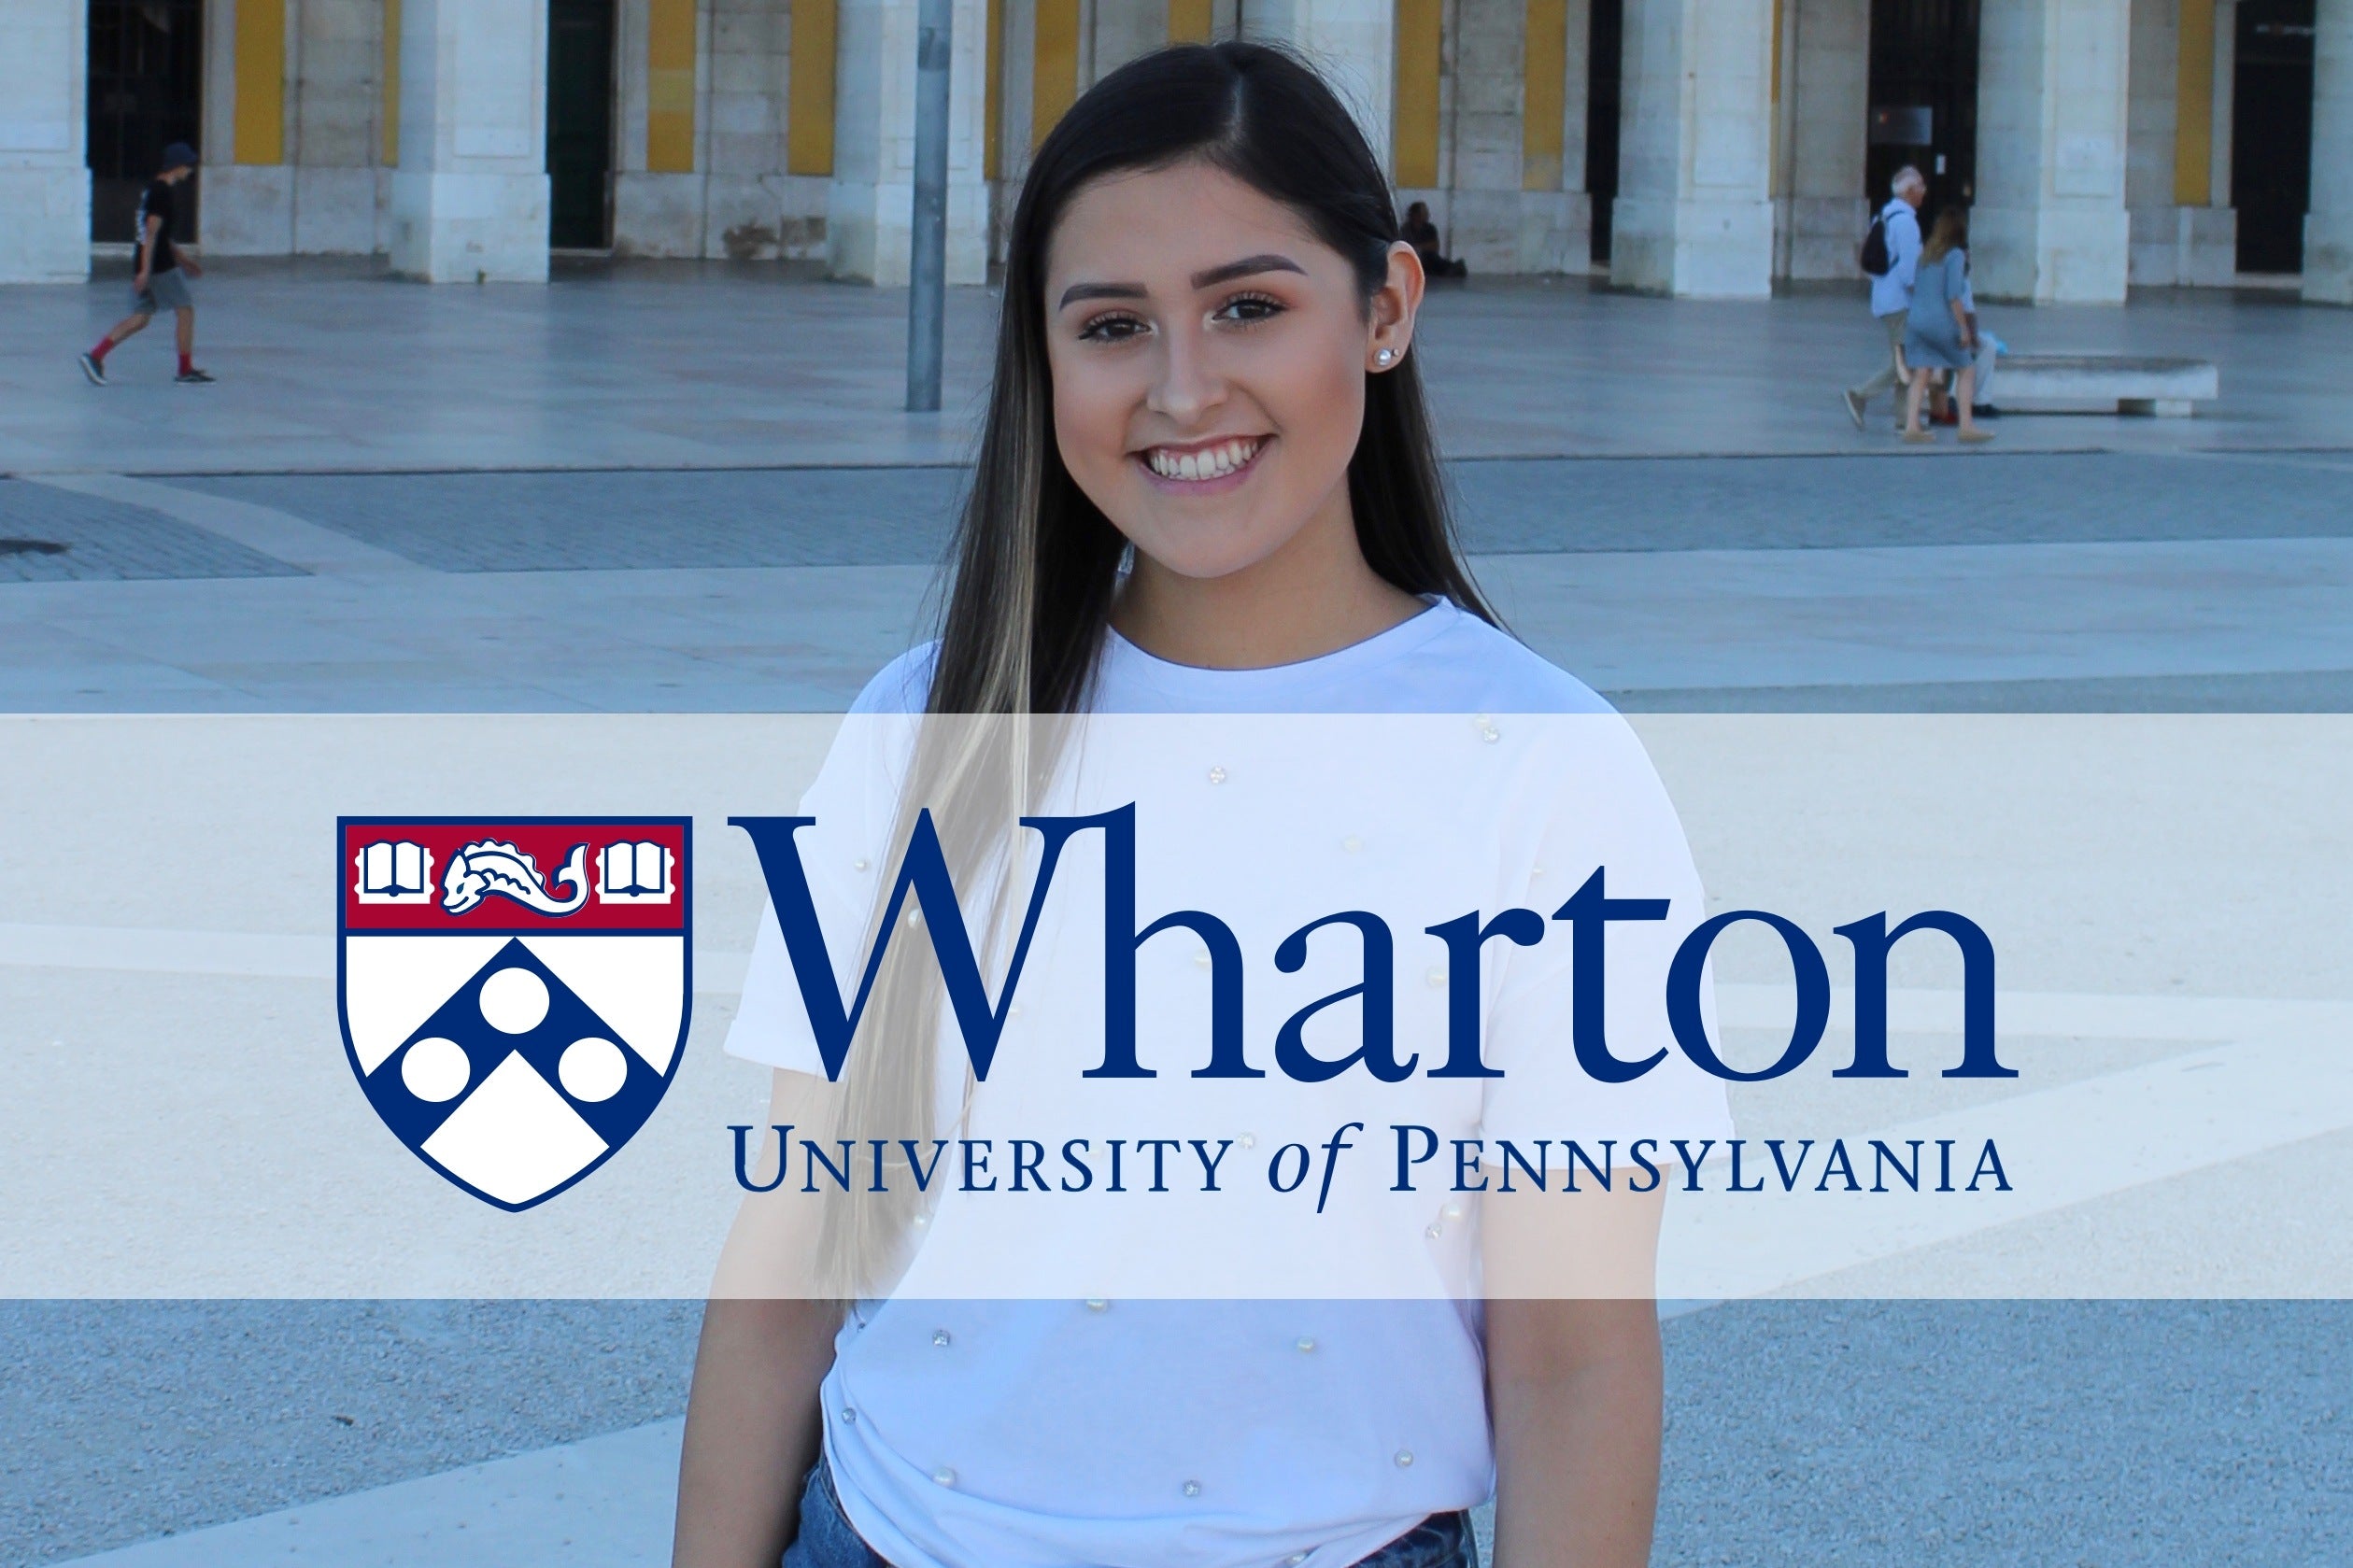 A Day in the Life of a Wharton Student – Carter & Clyde